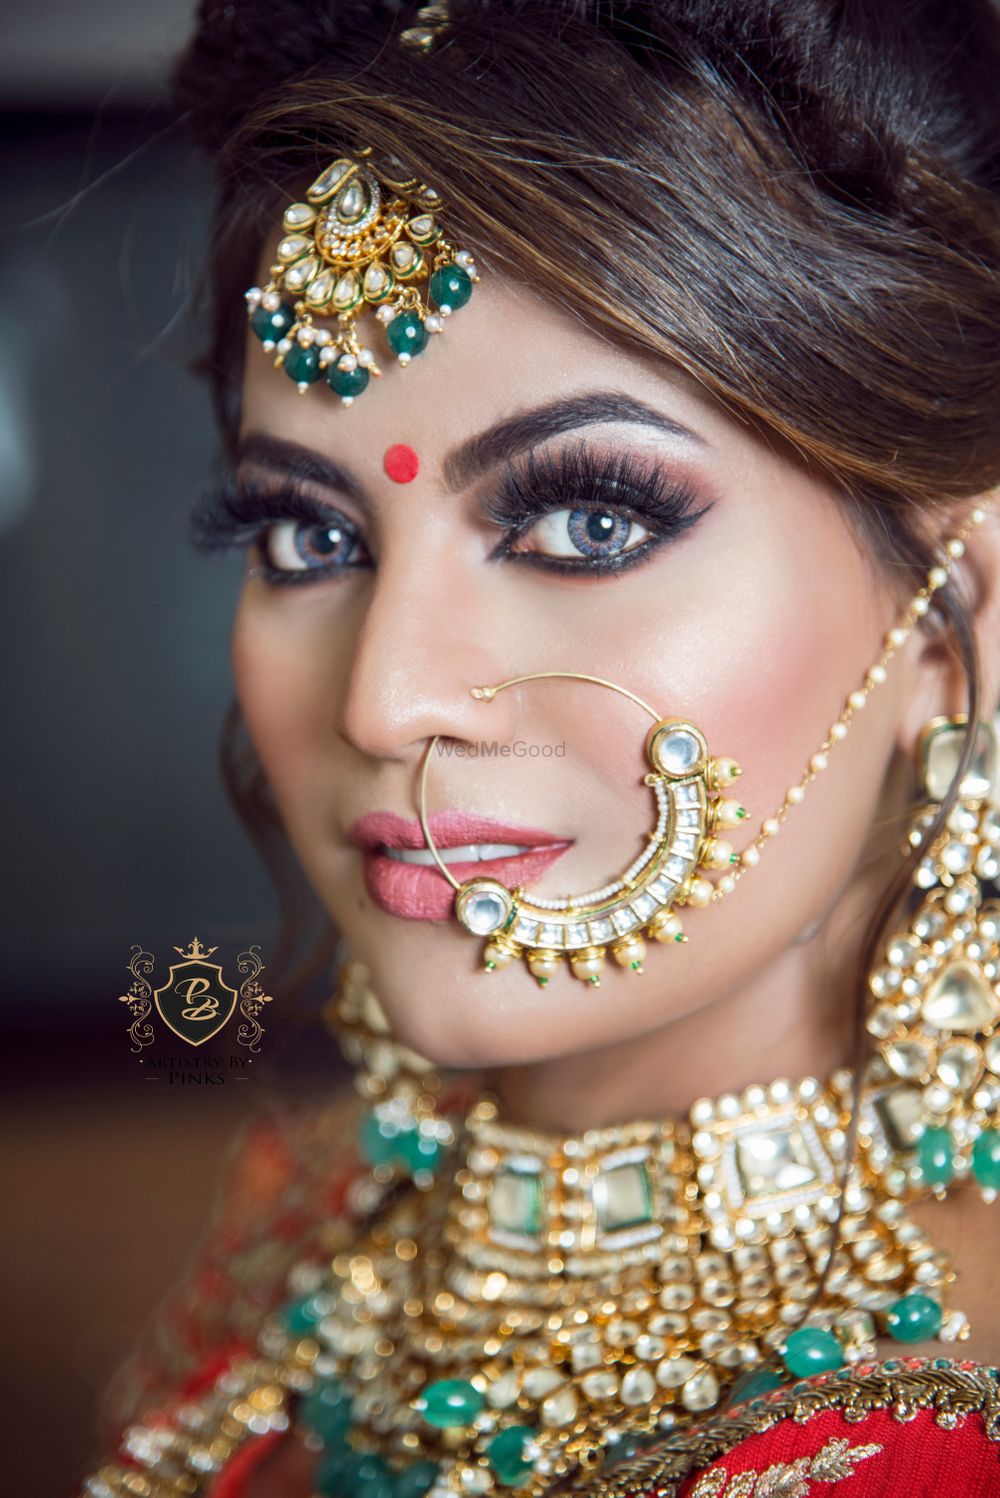 Photo From Airbrush Bridal - By Pinky Bhatia